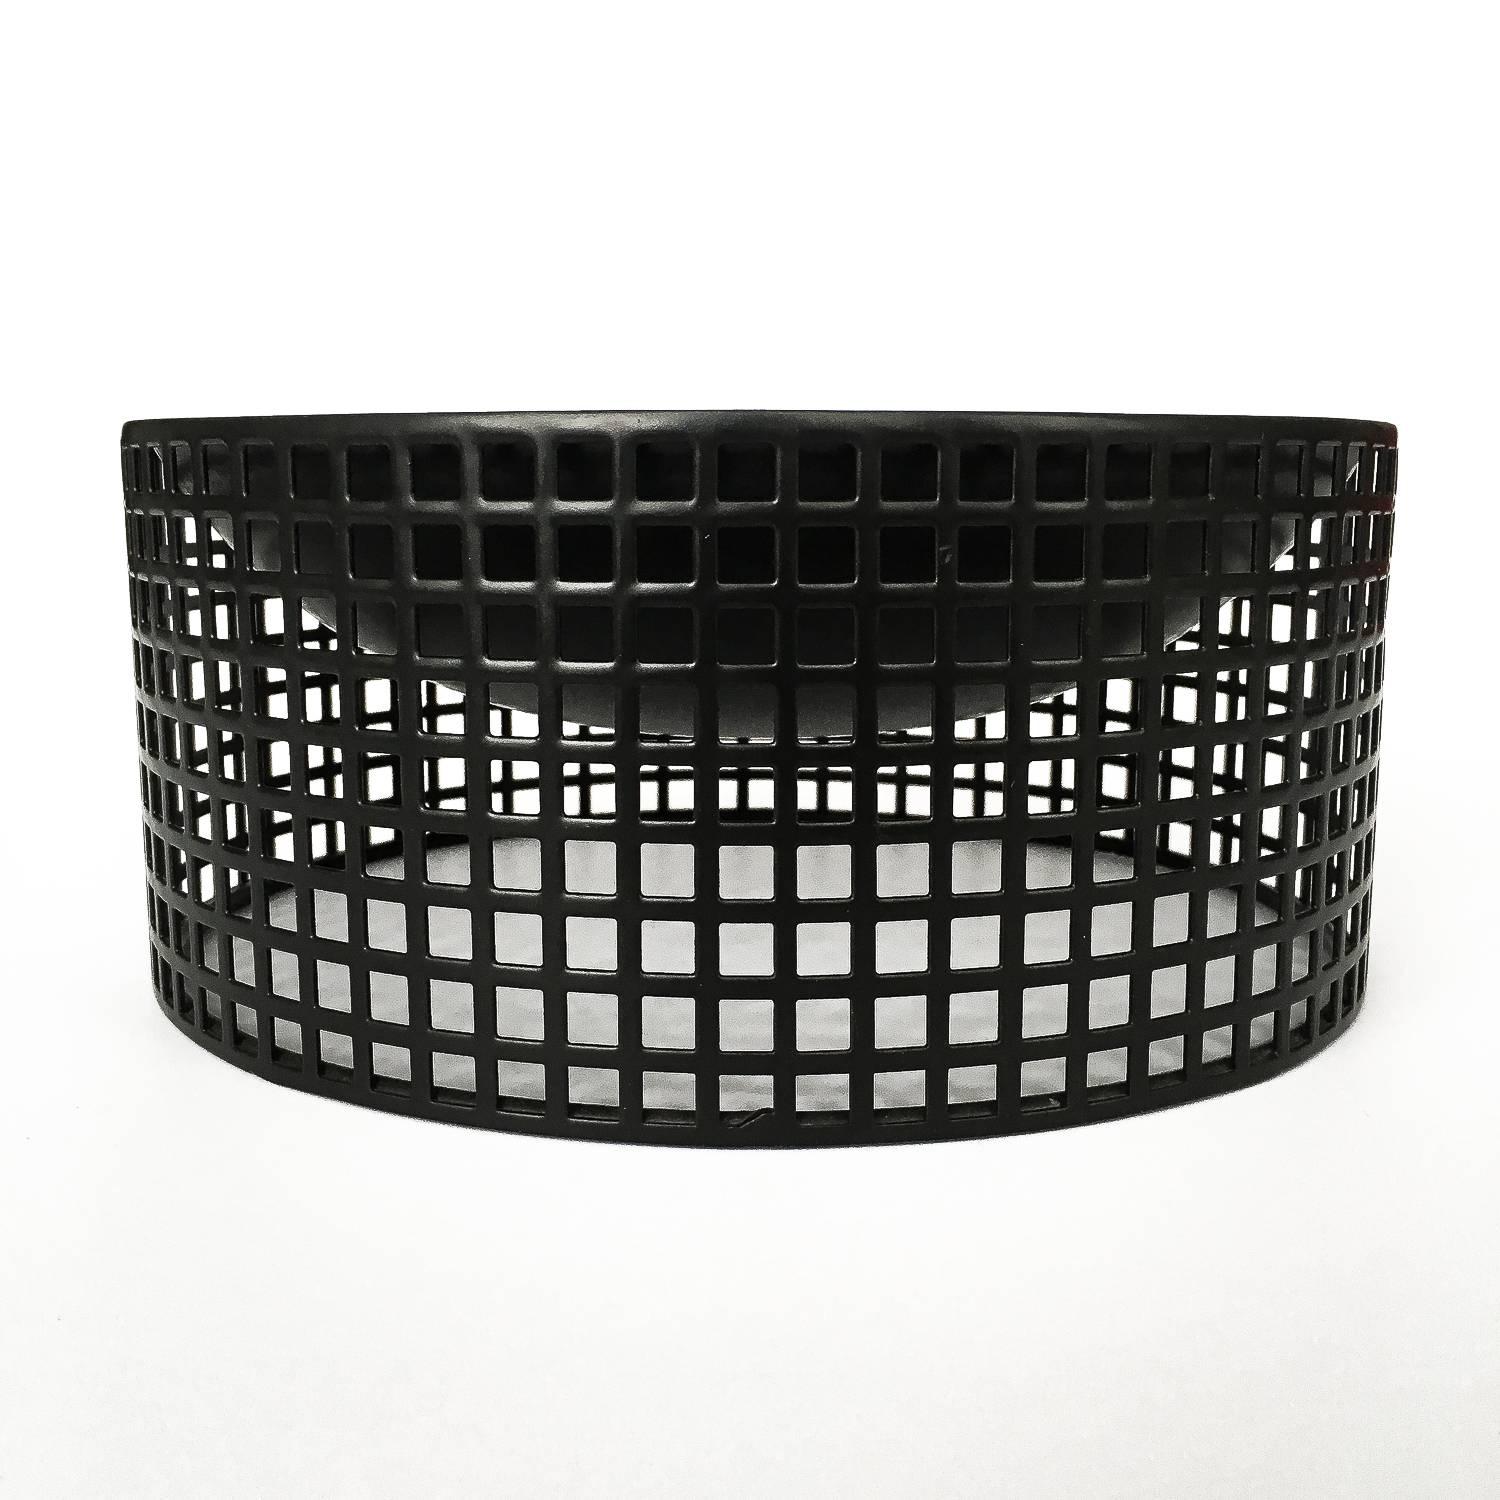 A 1980s reissue of the centrepiece fruit bowl by Josef Hoffmann (1870-1956) for Bieffeplast. The bowl was originally produced in 1904 by the Wiener Werkstätte founded by Josef Hoffmann in 1903. The bowl is made of black perforated metal that